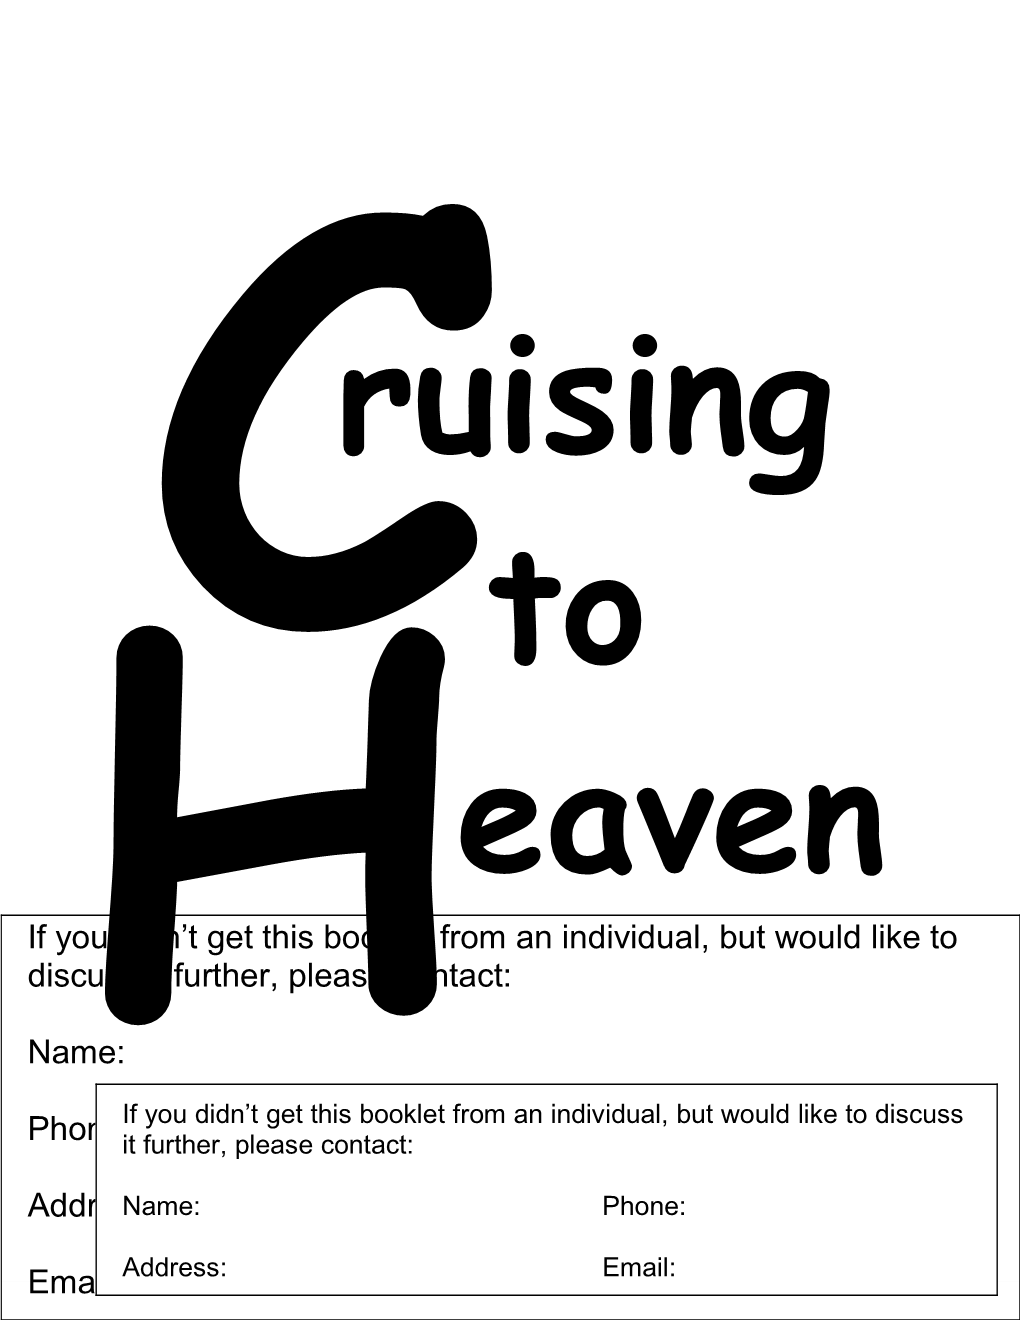 Cruising to Heaven Booklet (32G) Copyright 2004 by Lynn David Allan. Permission Is Granted